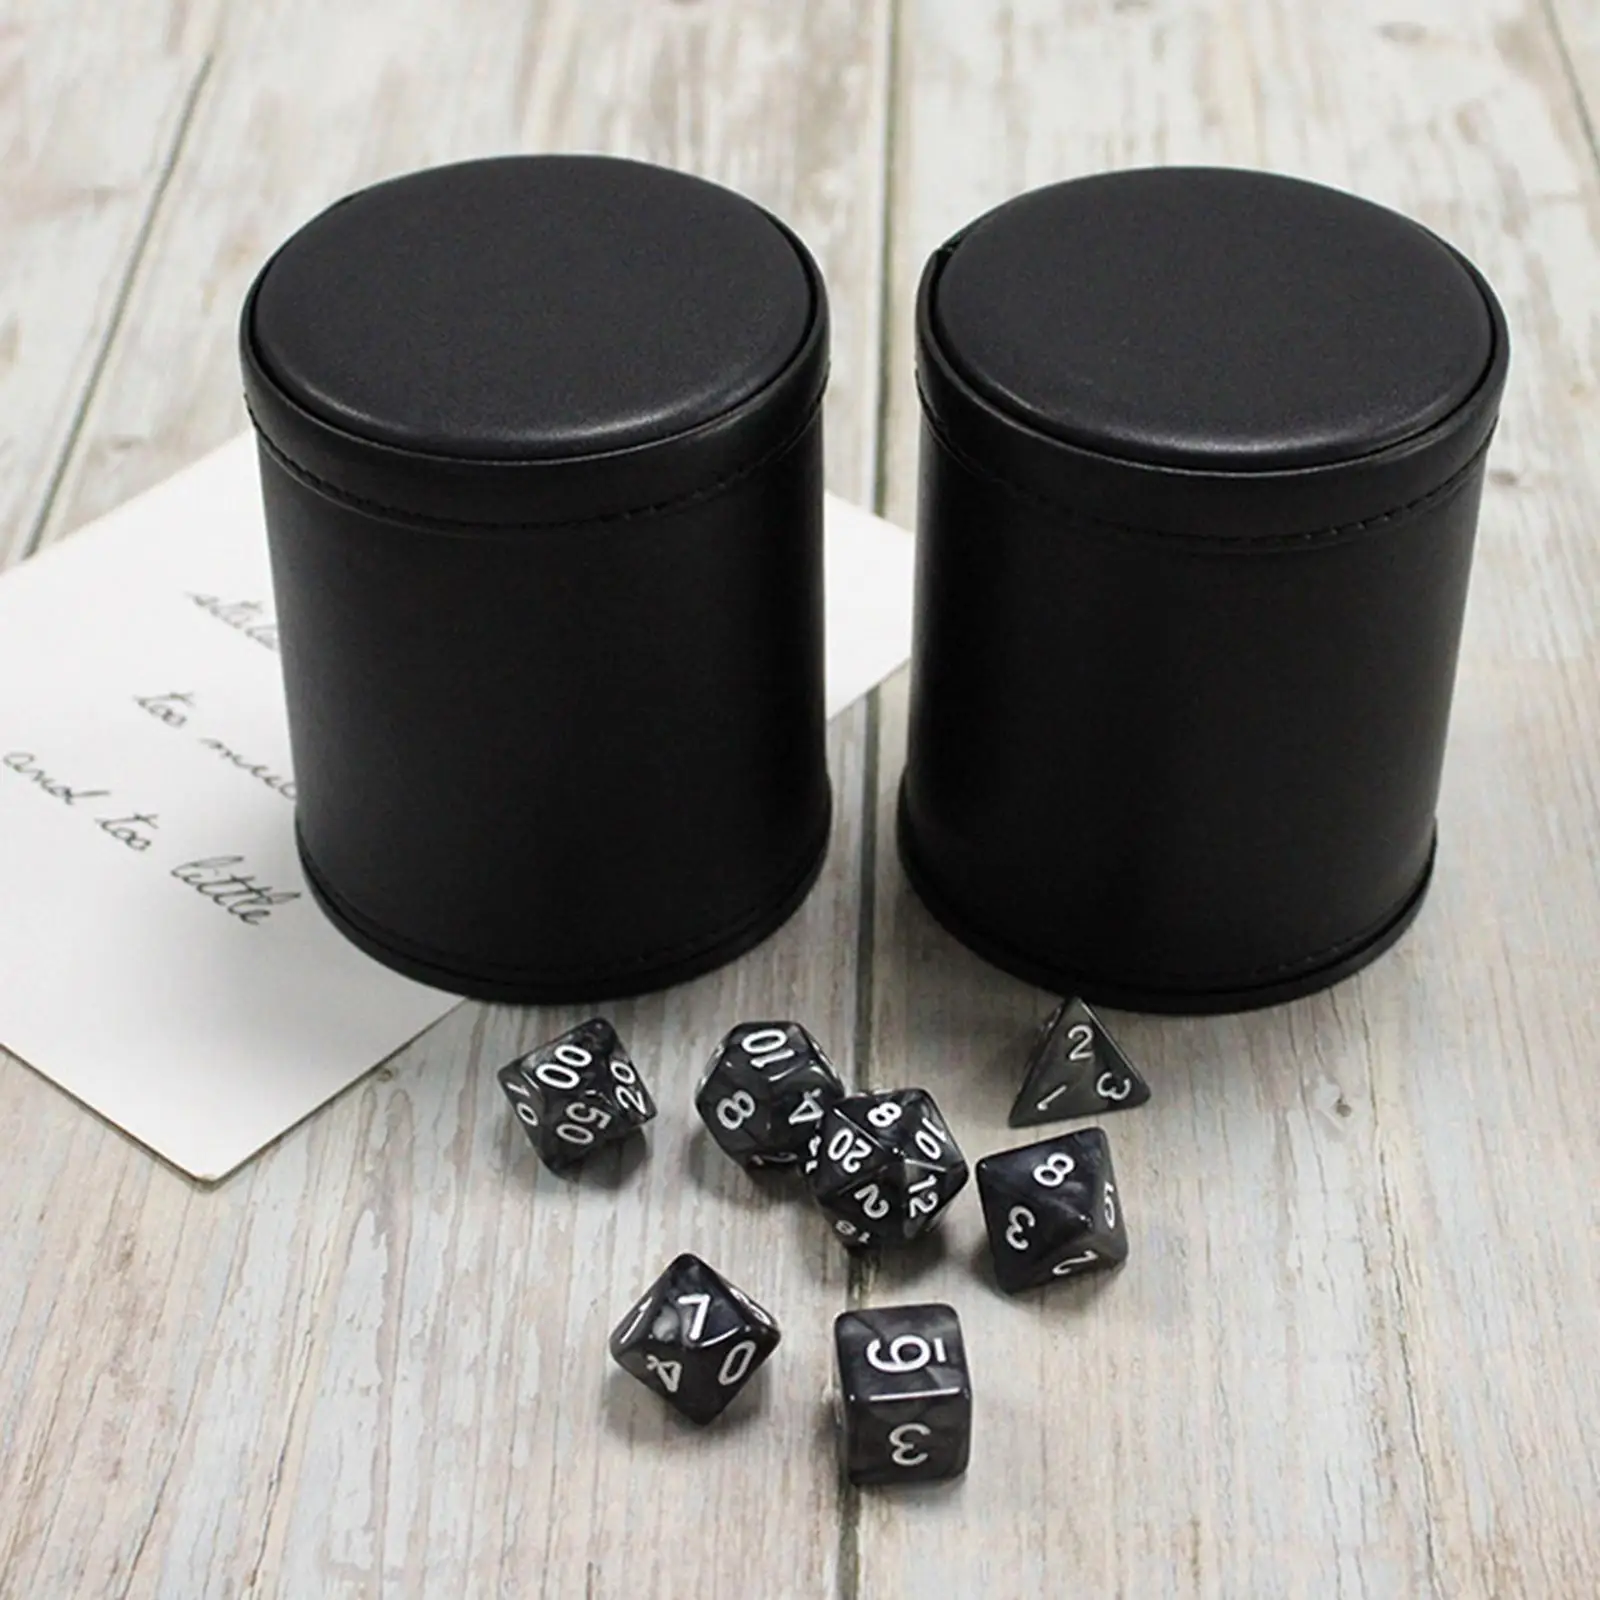 Protable Dice Cup Entertainment Dice Game Supplies Professional Leather Dice Decider Dice Shaker for Club Party Bar Family Home